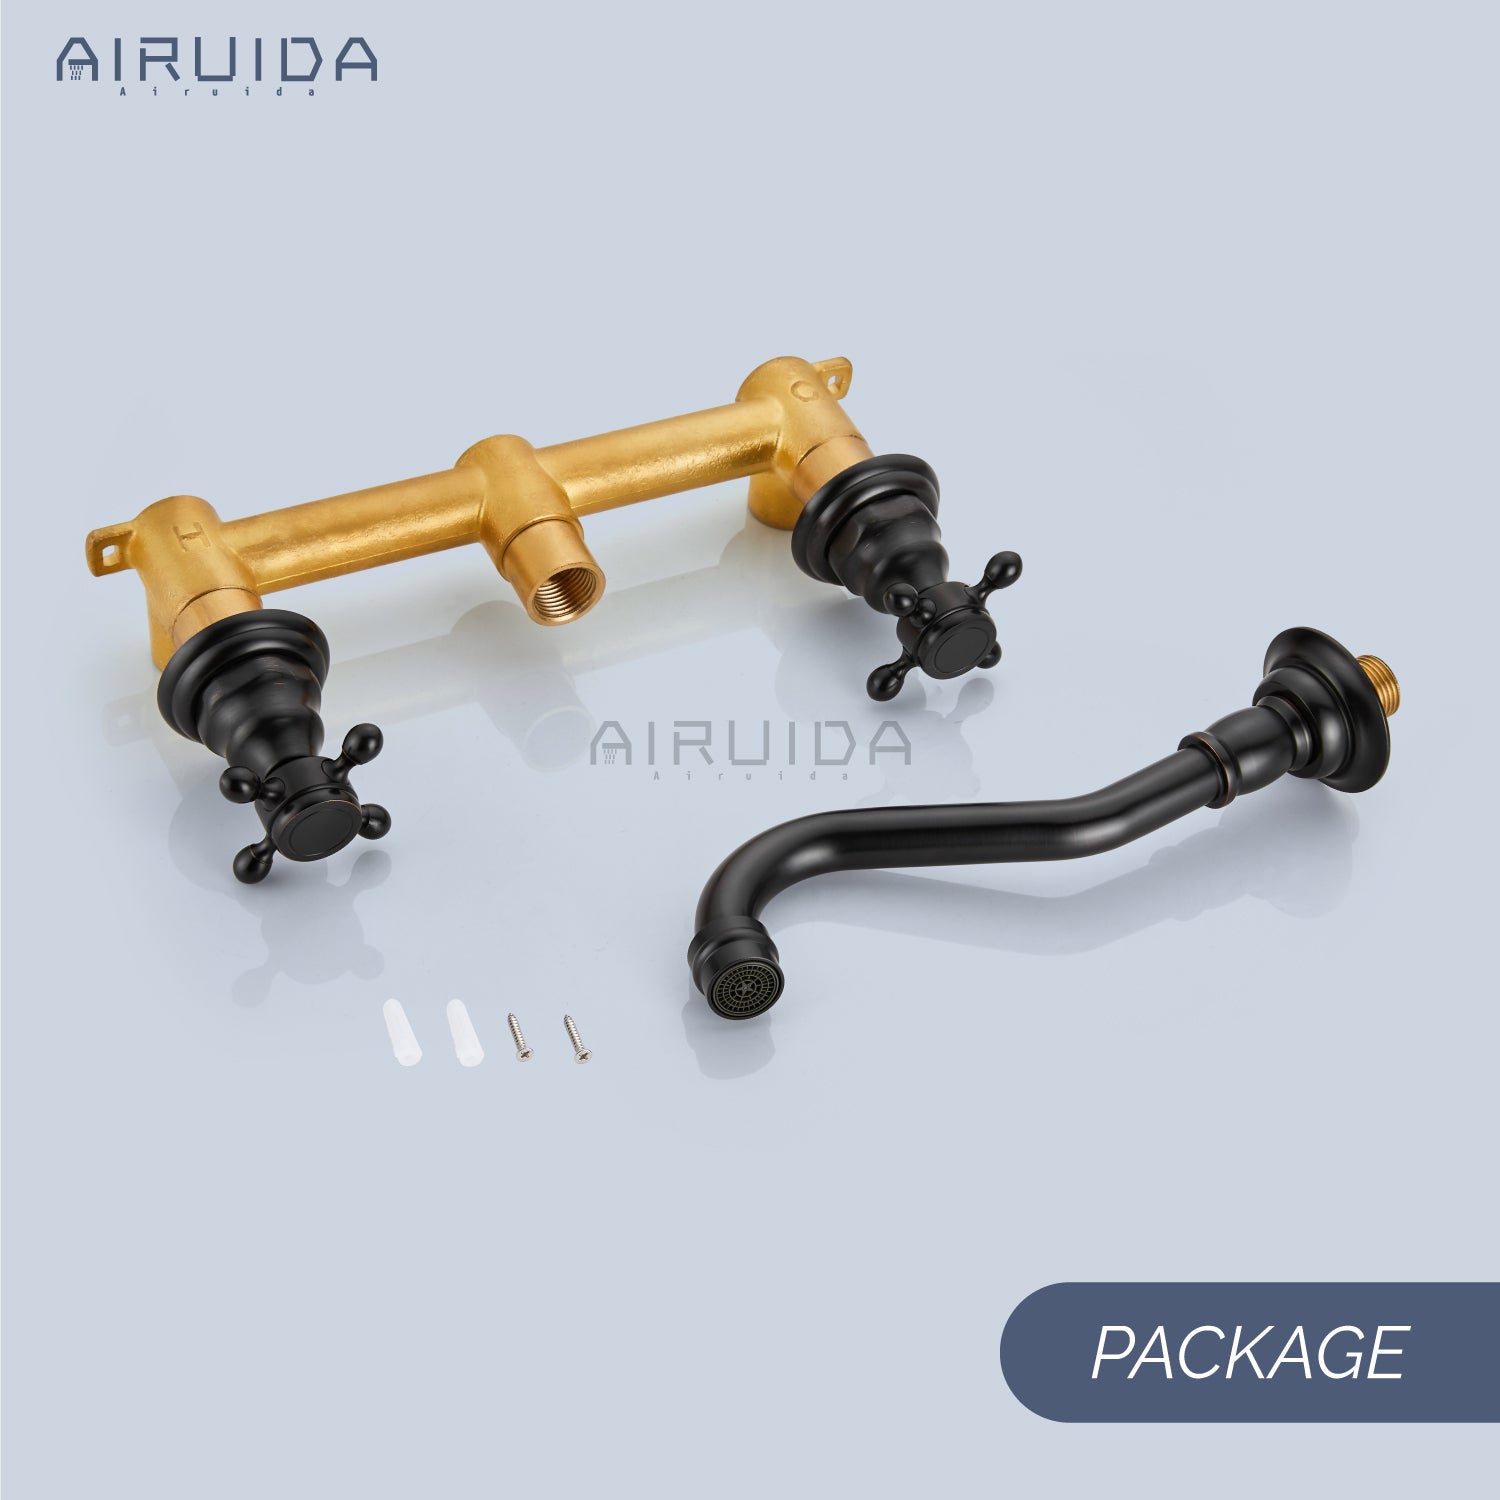 Airuida Wall Mount Faucet, Widespread Wall Mount Bathroom Sink Faucet, 360 Swivel Spout 2 Cross Knobs Handles 3 Holes Lavatory Basin Sink Mixing Faucet with Rough in Valve